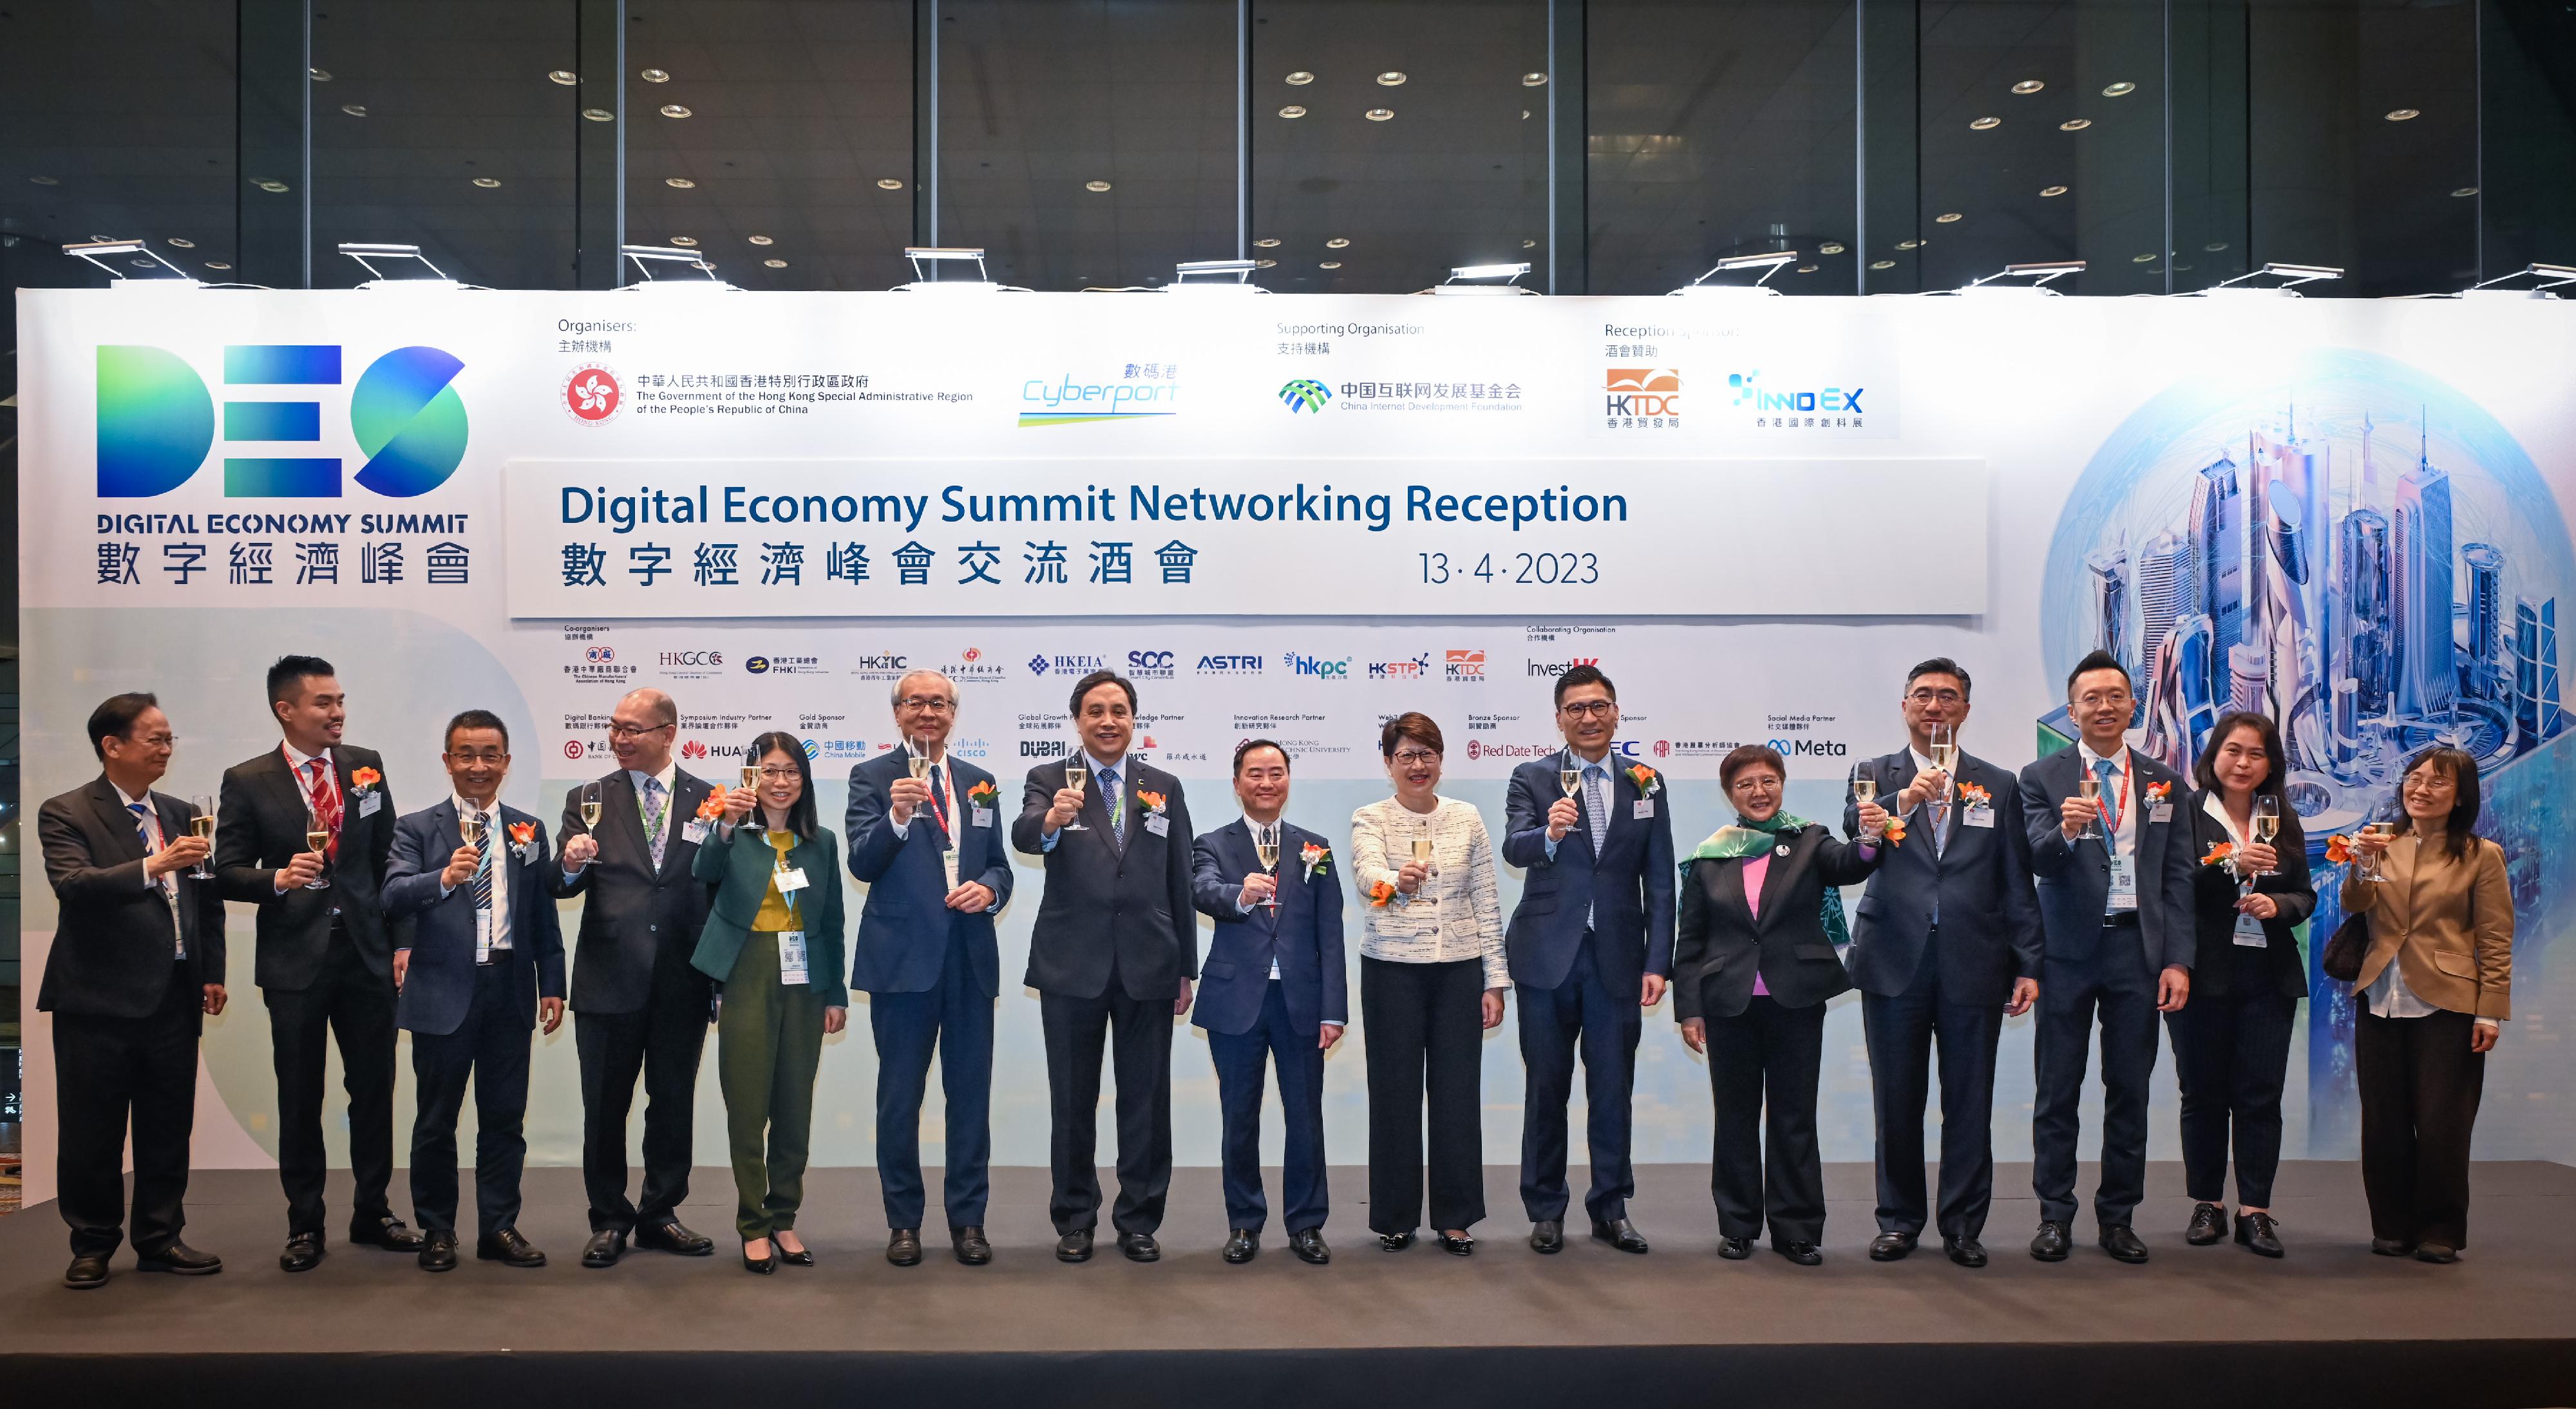 The Acting Government Chief Information Officer, Mr Tony Wong (centre); the Chairman of the Board of Directors of the Hong Kong Cyberport Management Company Limited, Mr Simon Chan (seventh left); Deputy Executive Director of the Hong Kong Trade Development Council Ms Sophia Chong (seventh right); and other guests propose a toast at the Digital Economy Summit 2023 Networking Reception today (April 13).